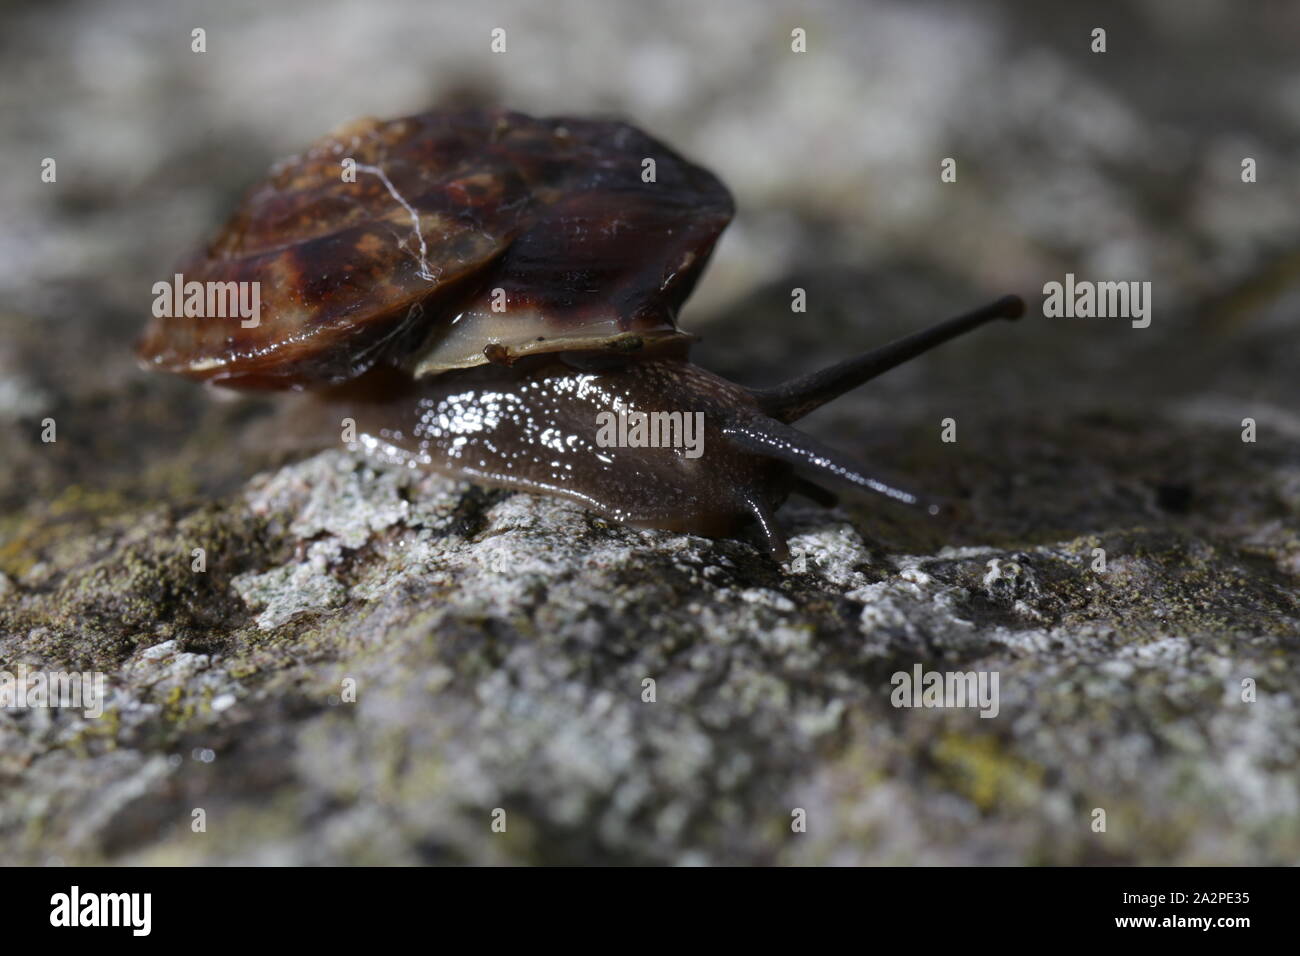 Lapidary snail on a stone wall Stock Photo